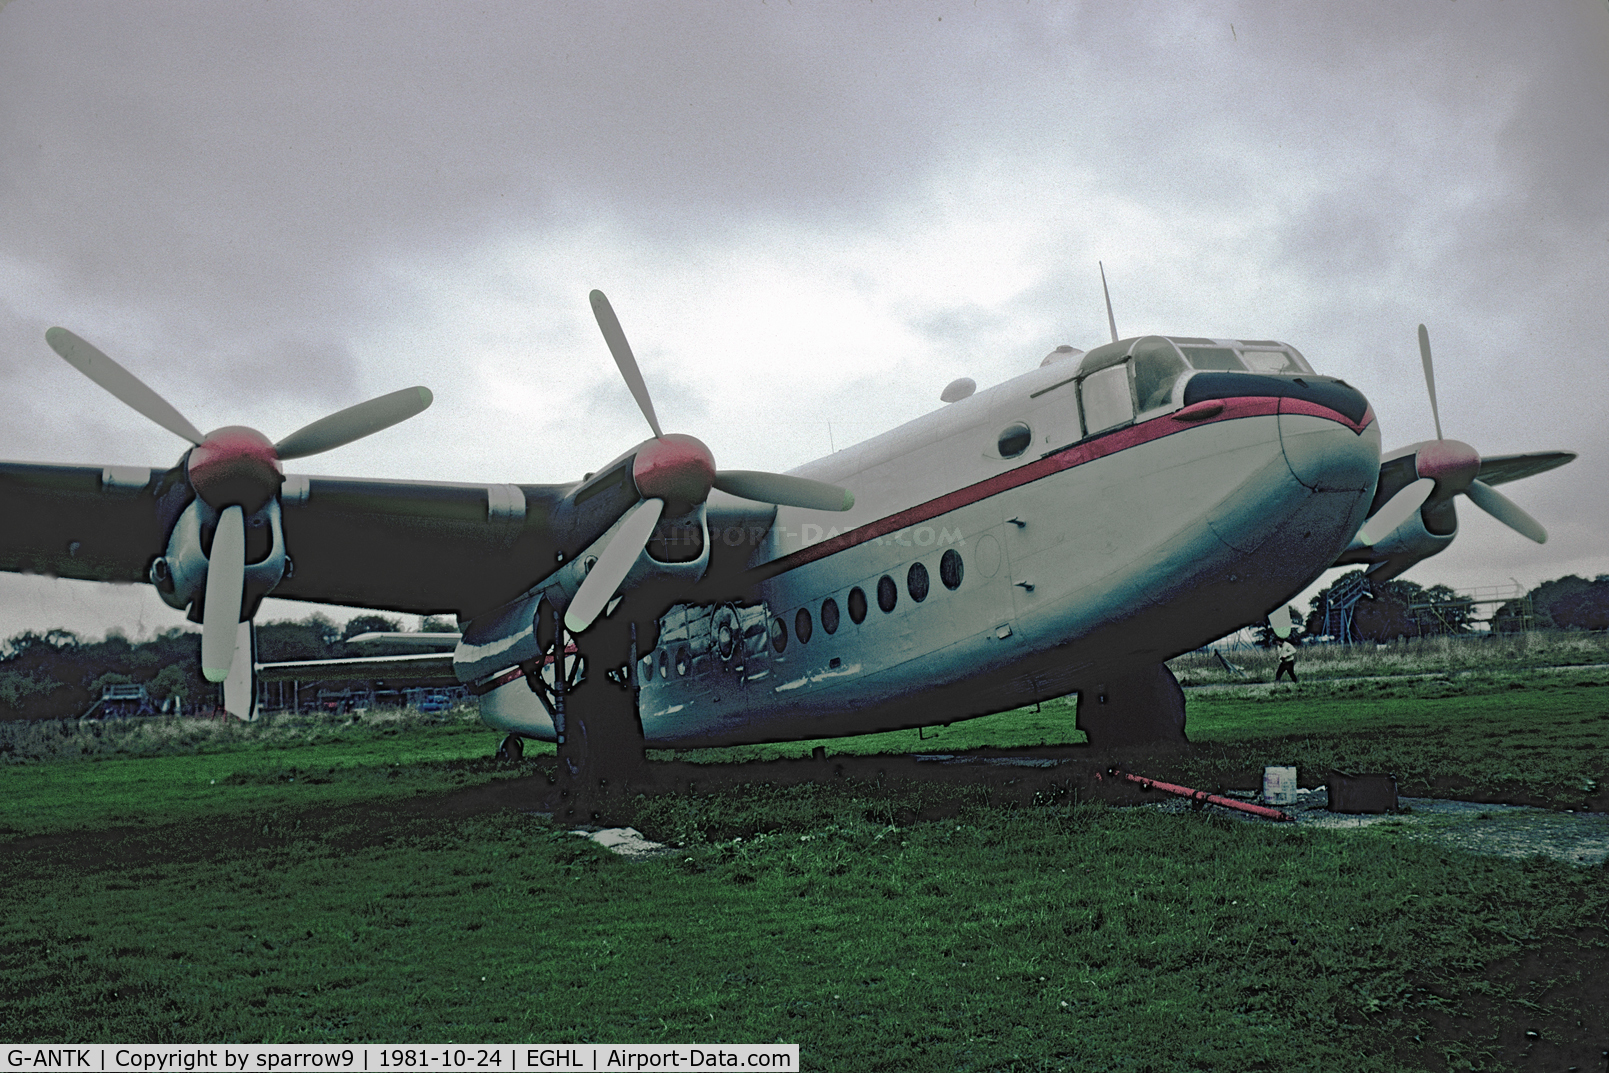 G-ANTK, 1946 Avro 685 YORK C1 C/N MW232, In a sad state at Lasham in bad weather. Scanned from a slide.